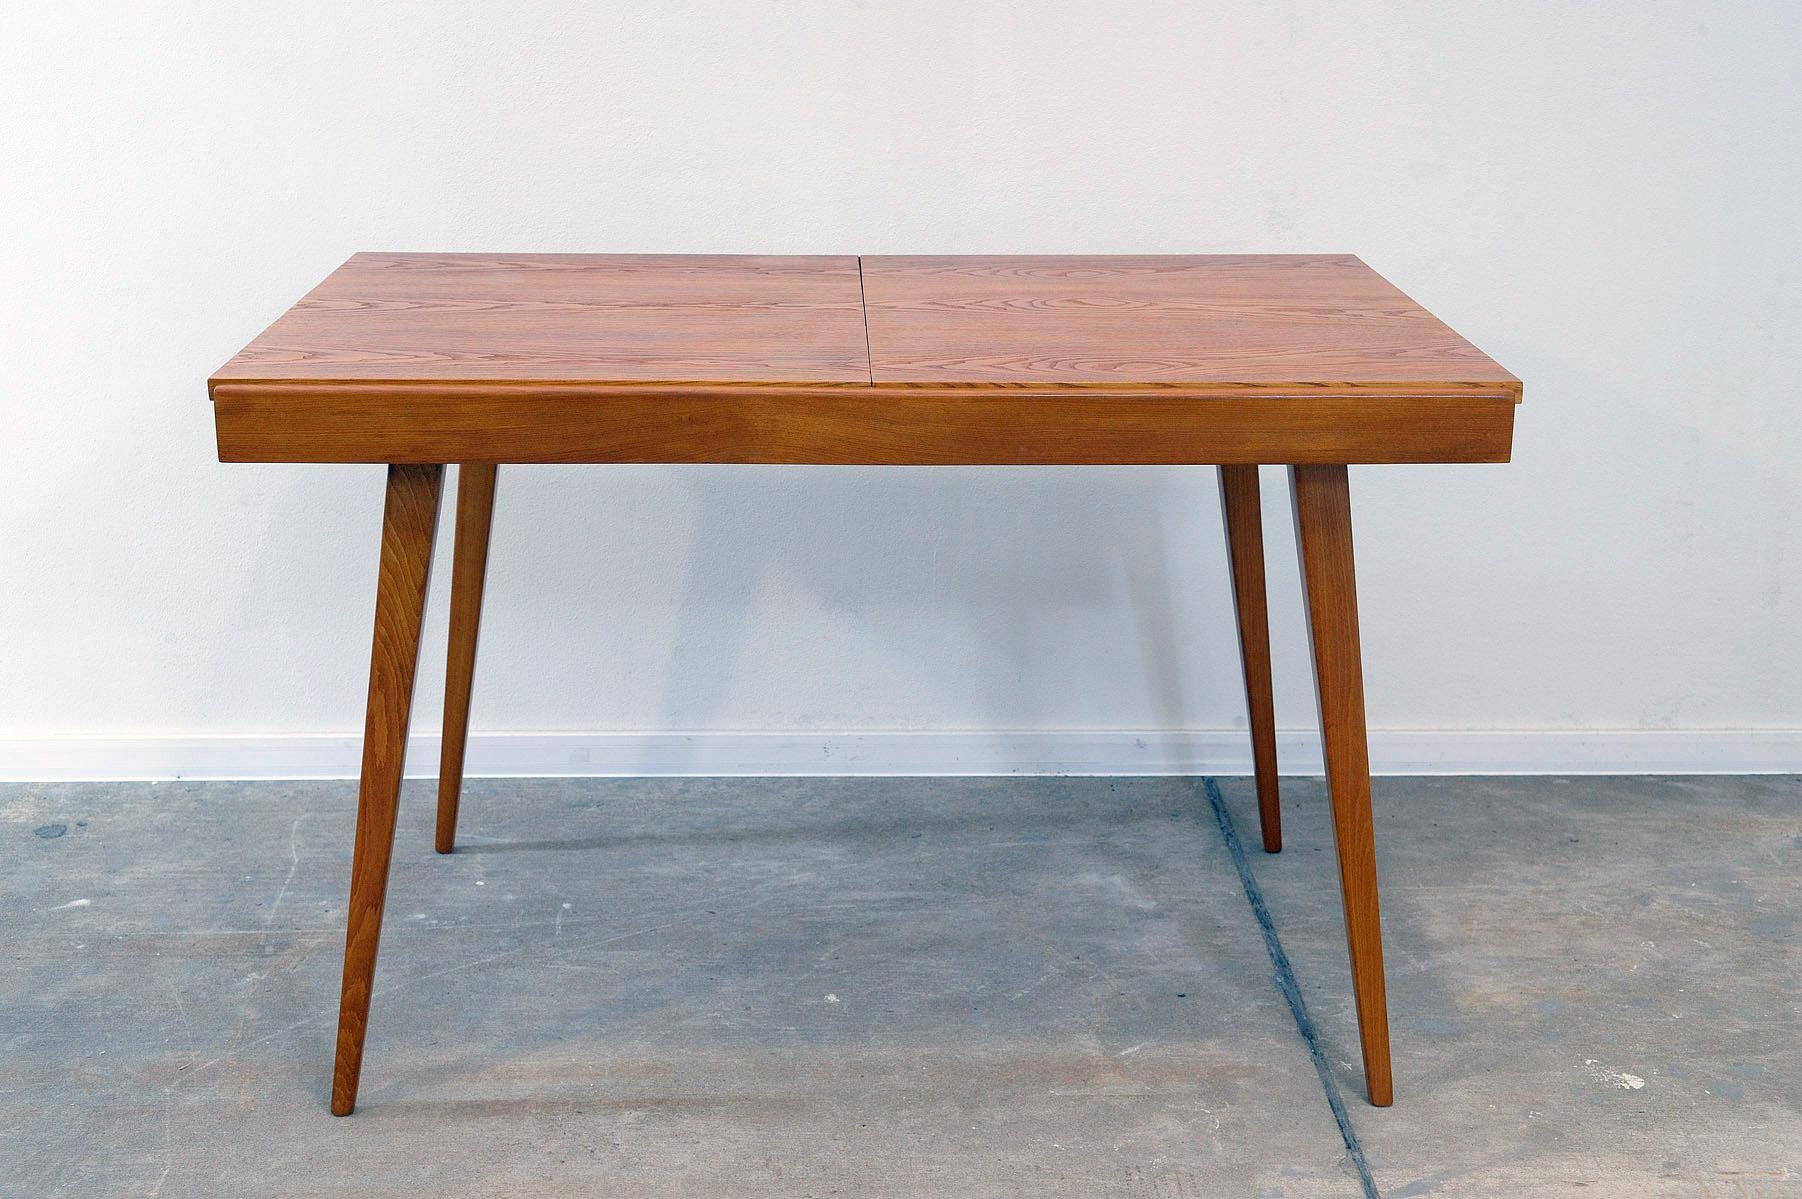 This midcentury adjustable dining table was designed by František Jirák for Tatra nábytok and made in the former Czechoslovakia in the 1970´s.  It´s made of ash and beech wood.  The lenght is adjustable from 120 cm to 180 cm. The table is in